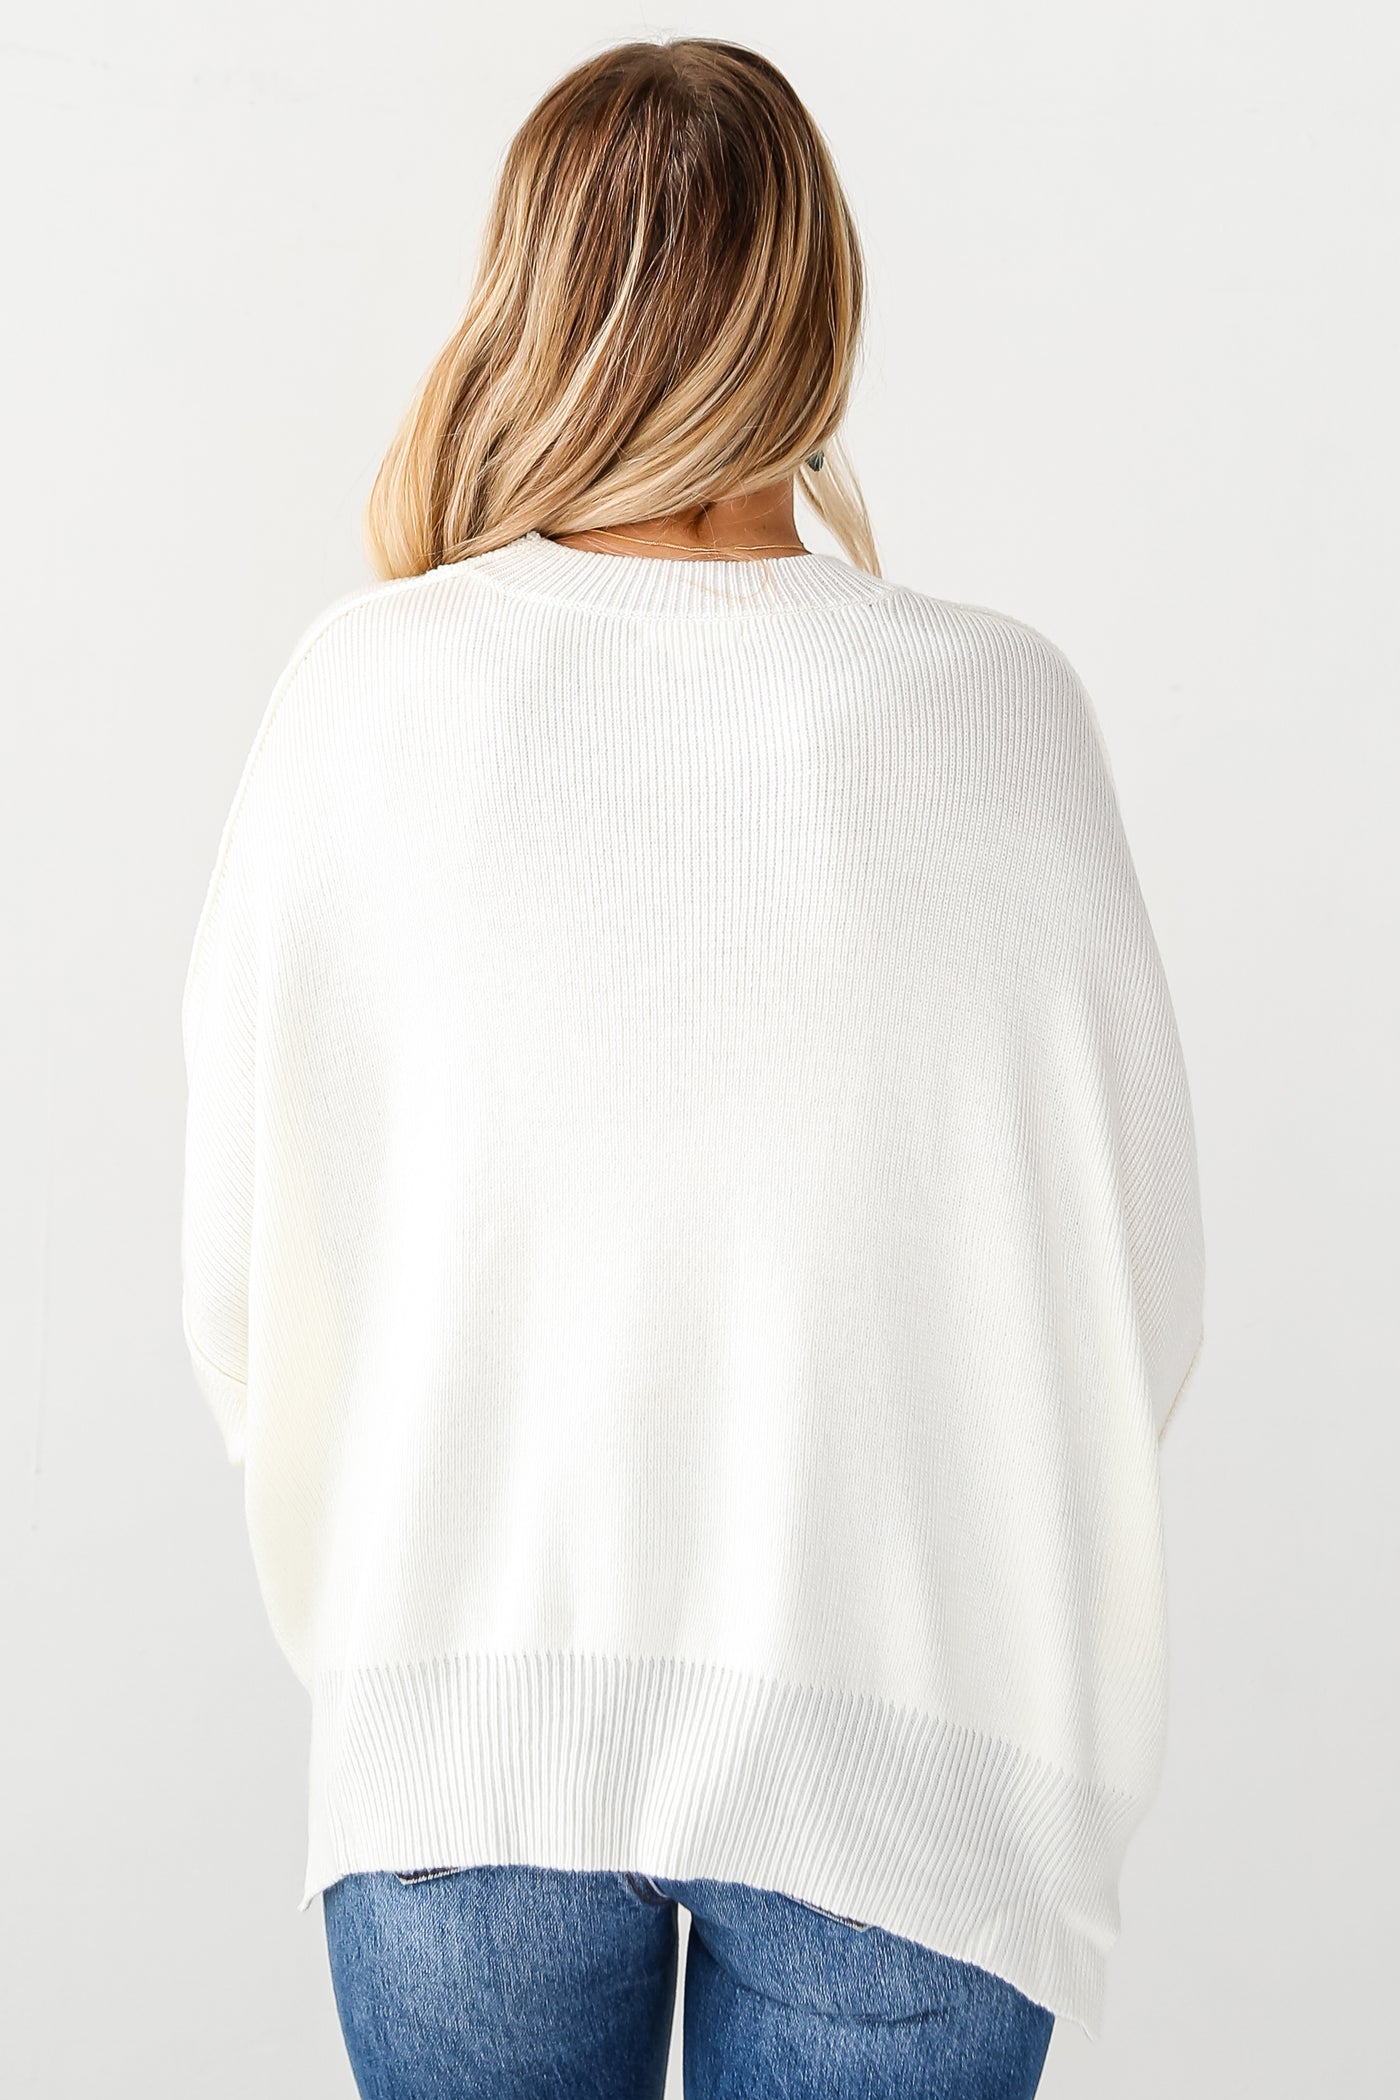 white Oversized Sweater back view